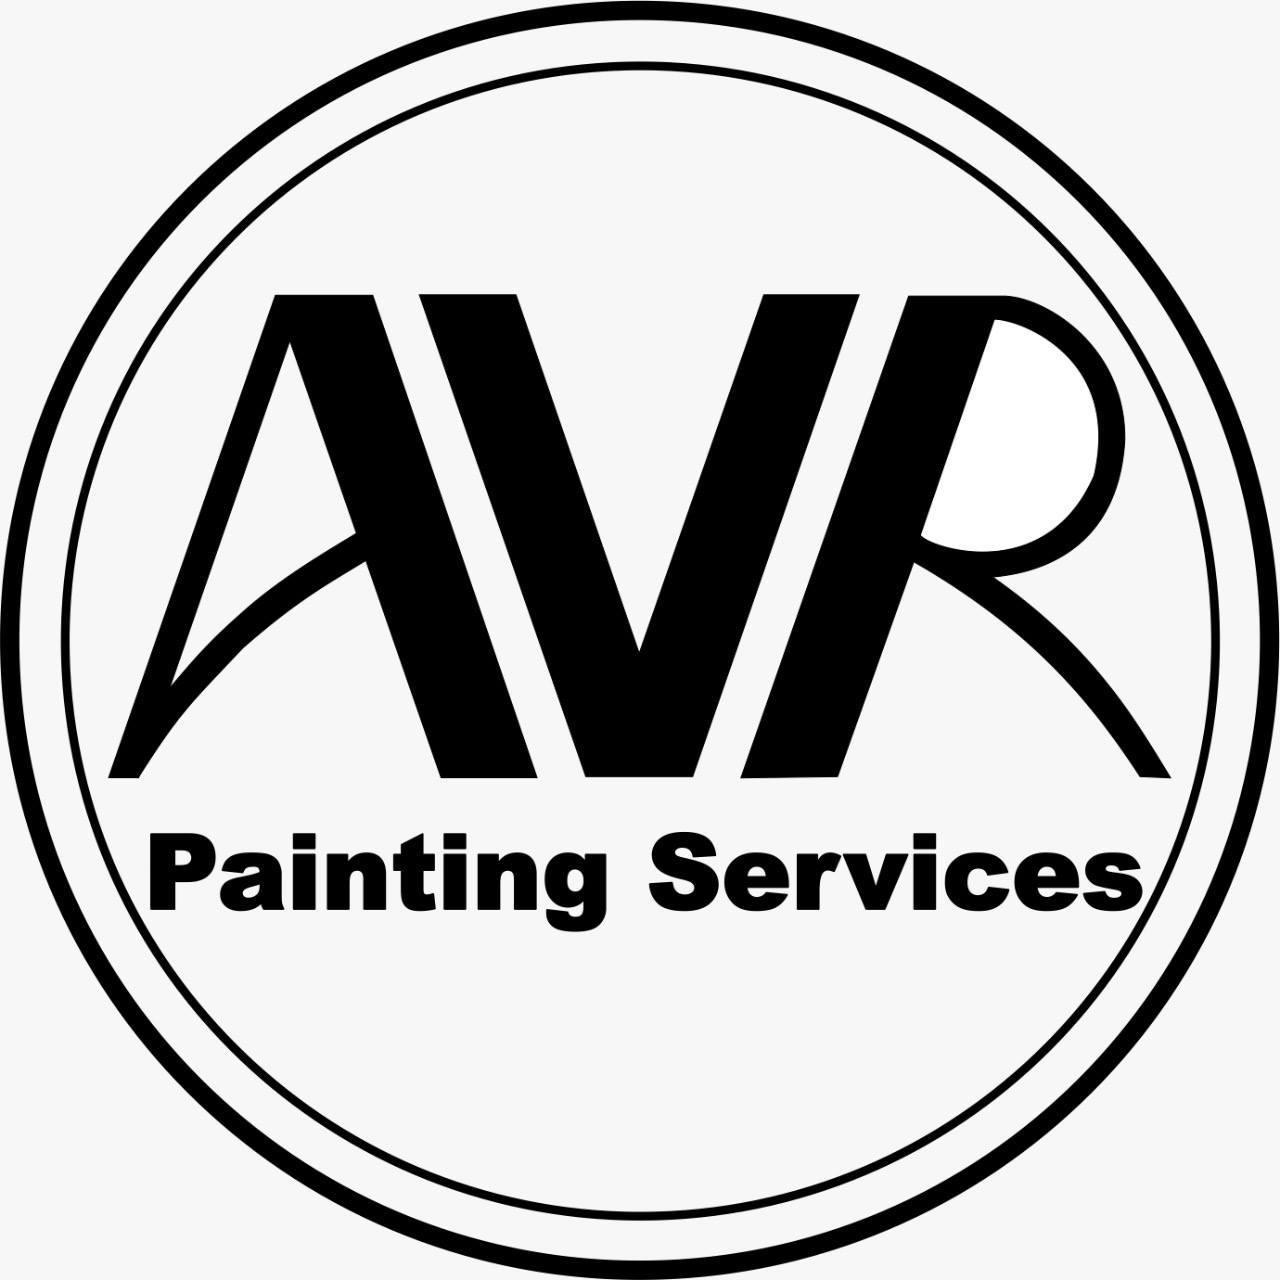 AVR Painting Services - Miami, FL - (305)910-5736 | ShowMeLocal.com